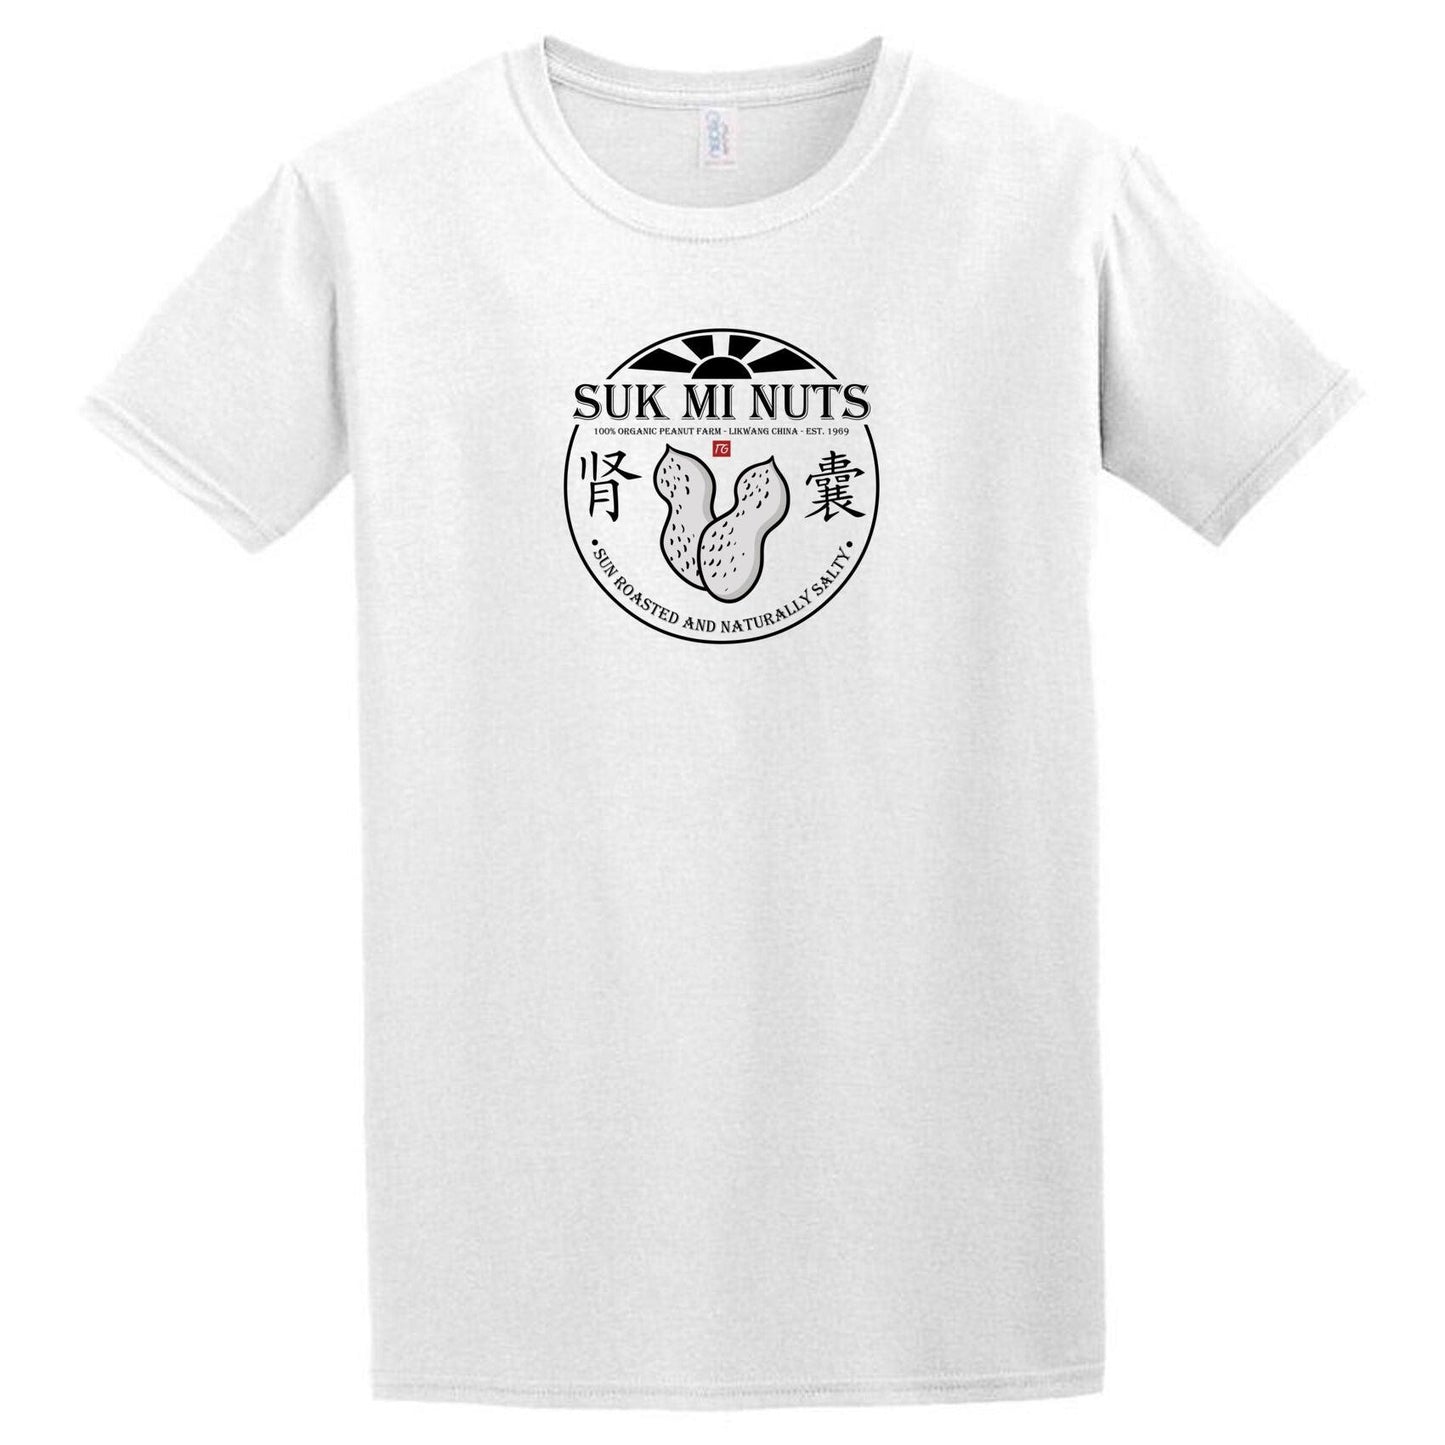 A white Suk Mi Nuts T-Shirt with a chinese logo on it by Twisted Gifts.